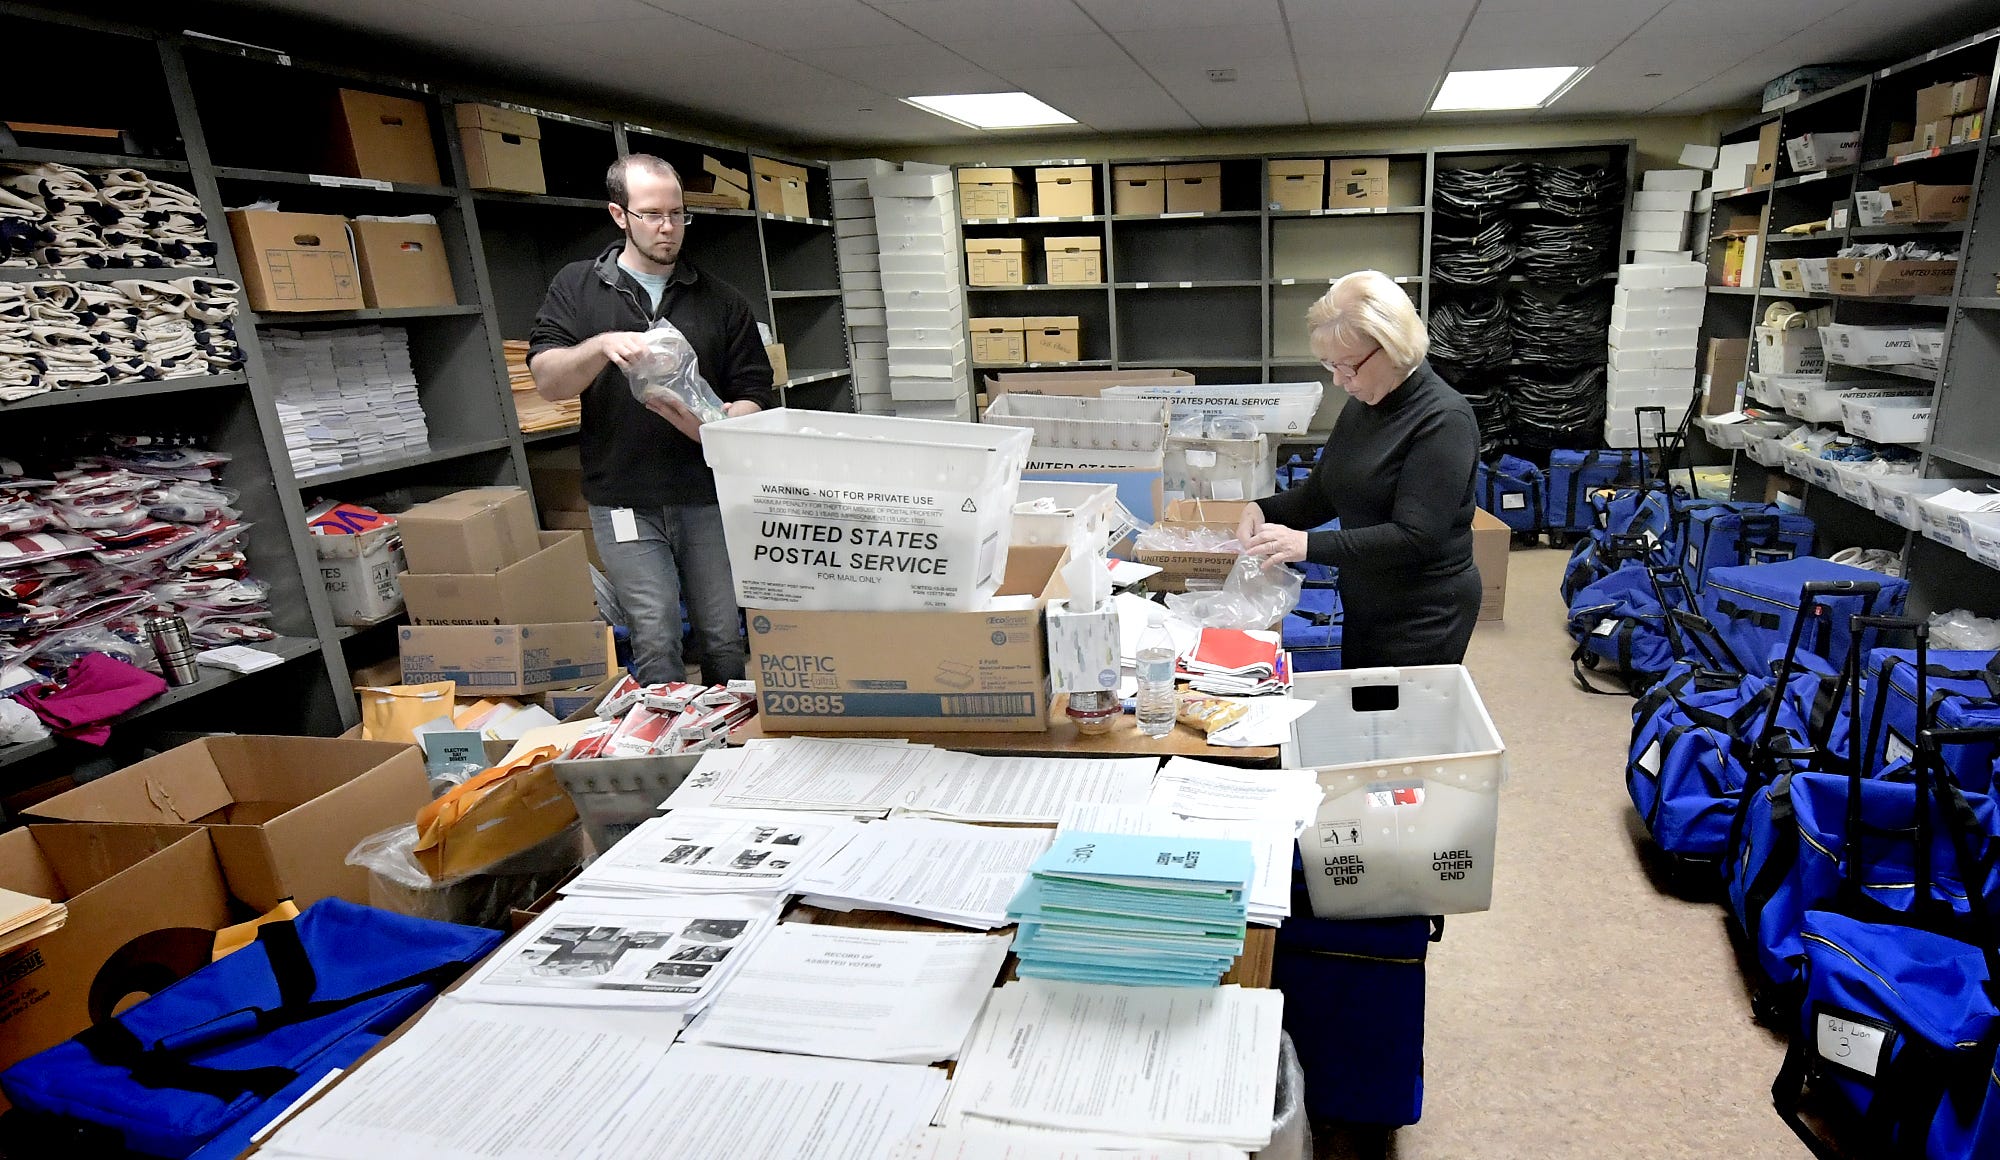 Temporary county workers Derek Kennell and Doris Feeser sort and store items returned from polling sites at the Elections and Voters Office at the York County Administration Building Thursday, November 7, 2019. The final vote tally was released earlier that morning after glitches with the new voting procedure on Tuesday delayed the count. Bill Kalina photo